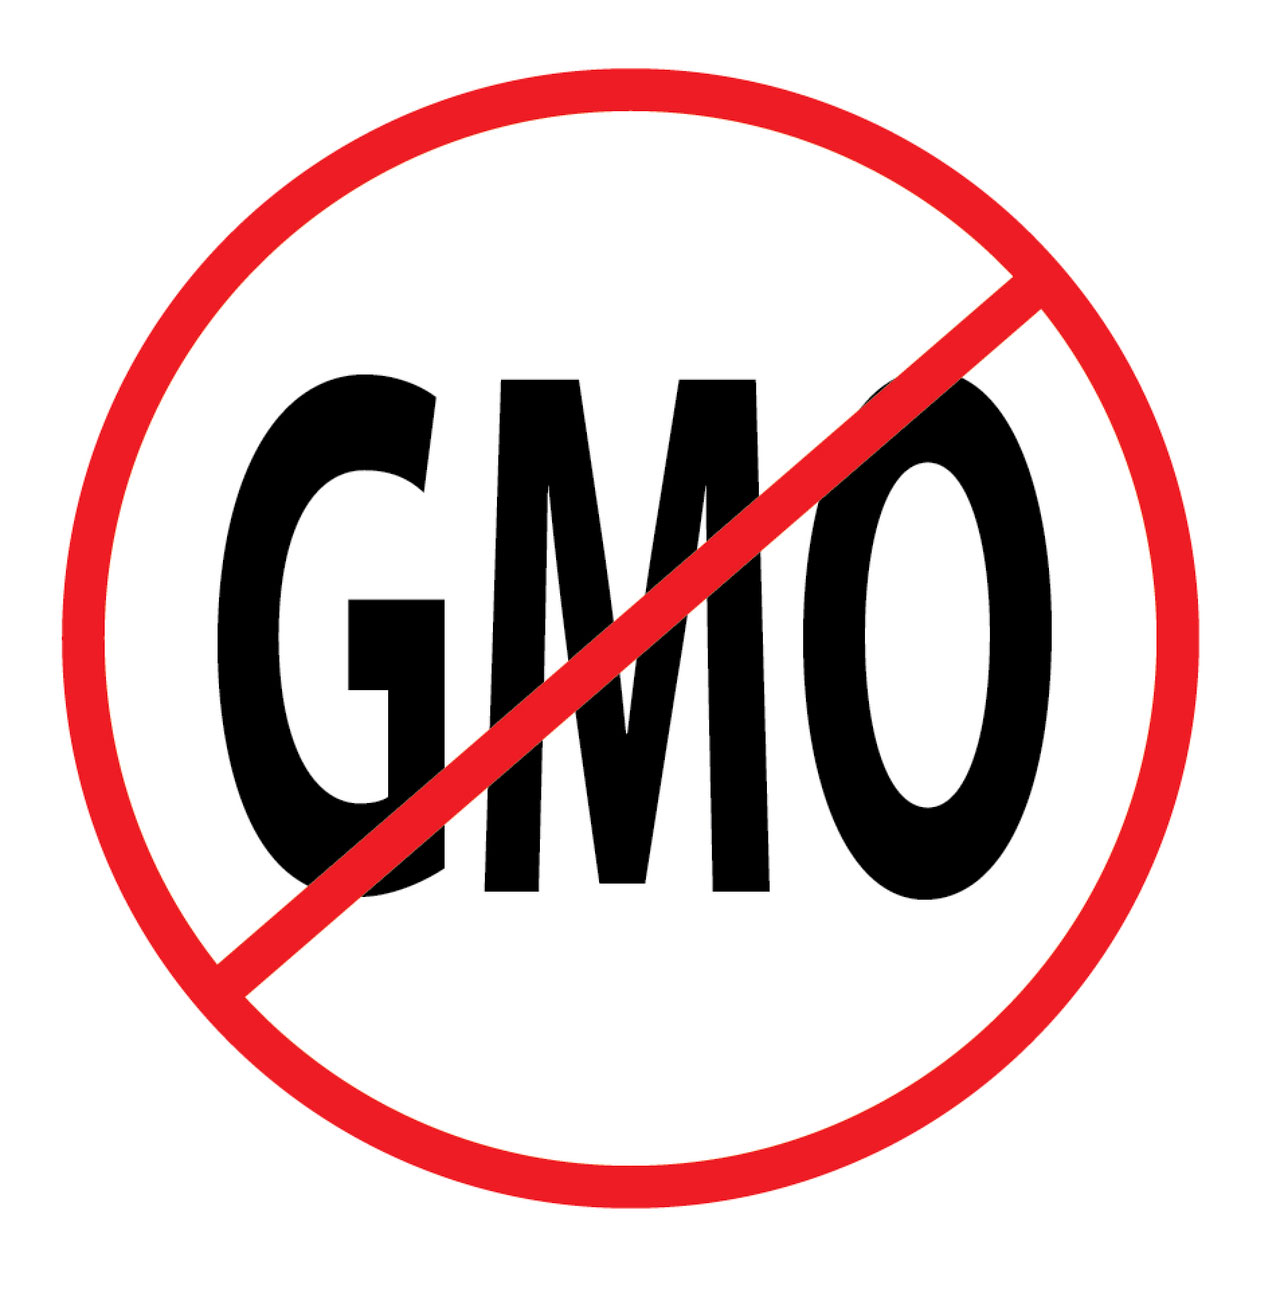 The word 'GMO' with a red circle with a line through it.